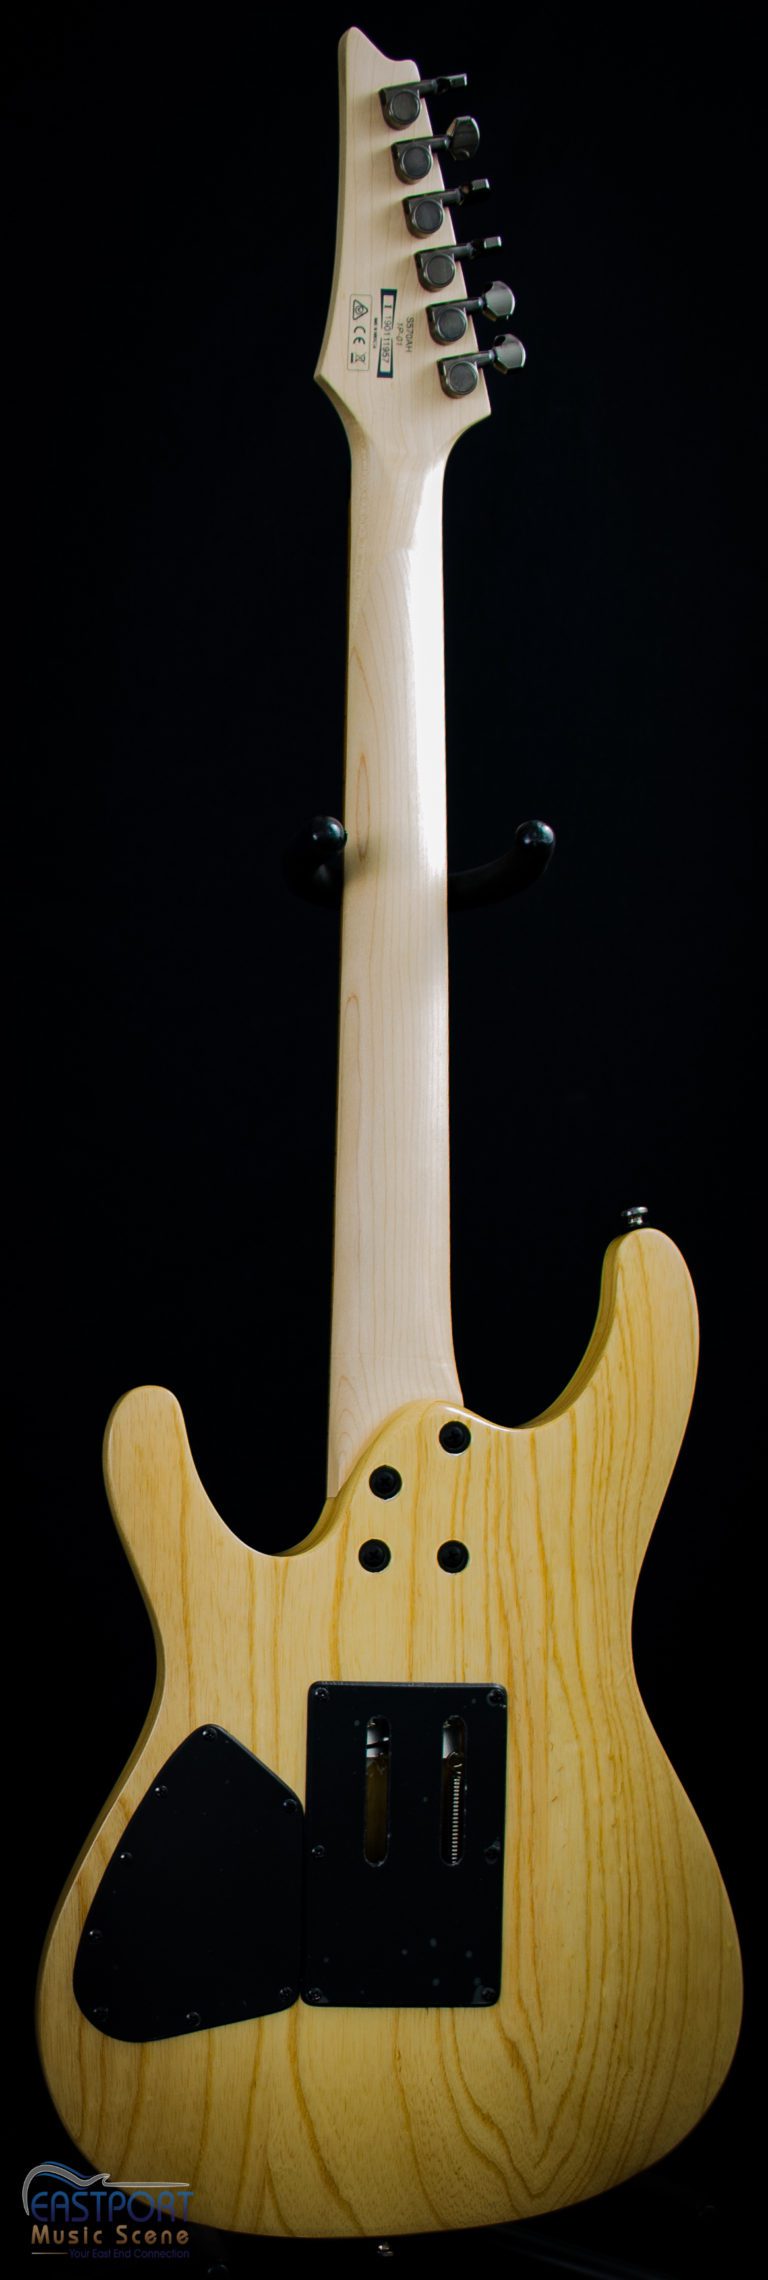 A guitar with a wooden body and a white face.